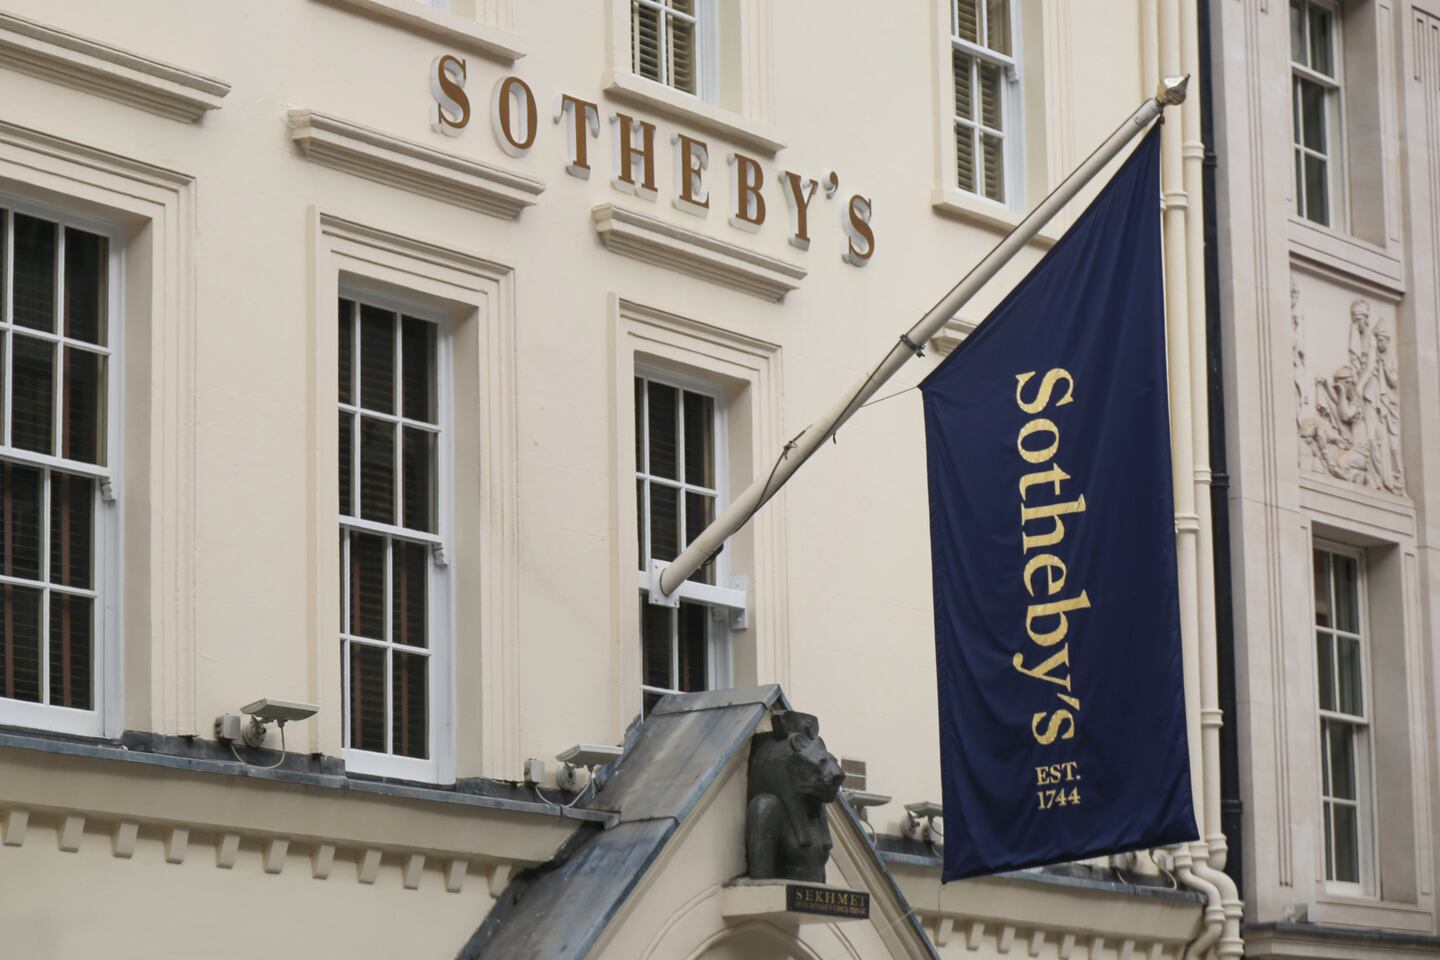 Sotheby's auction house, London. Shutterstock.